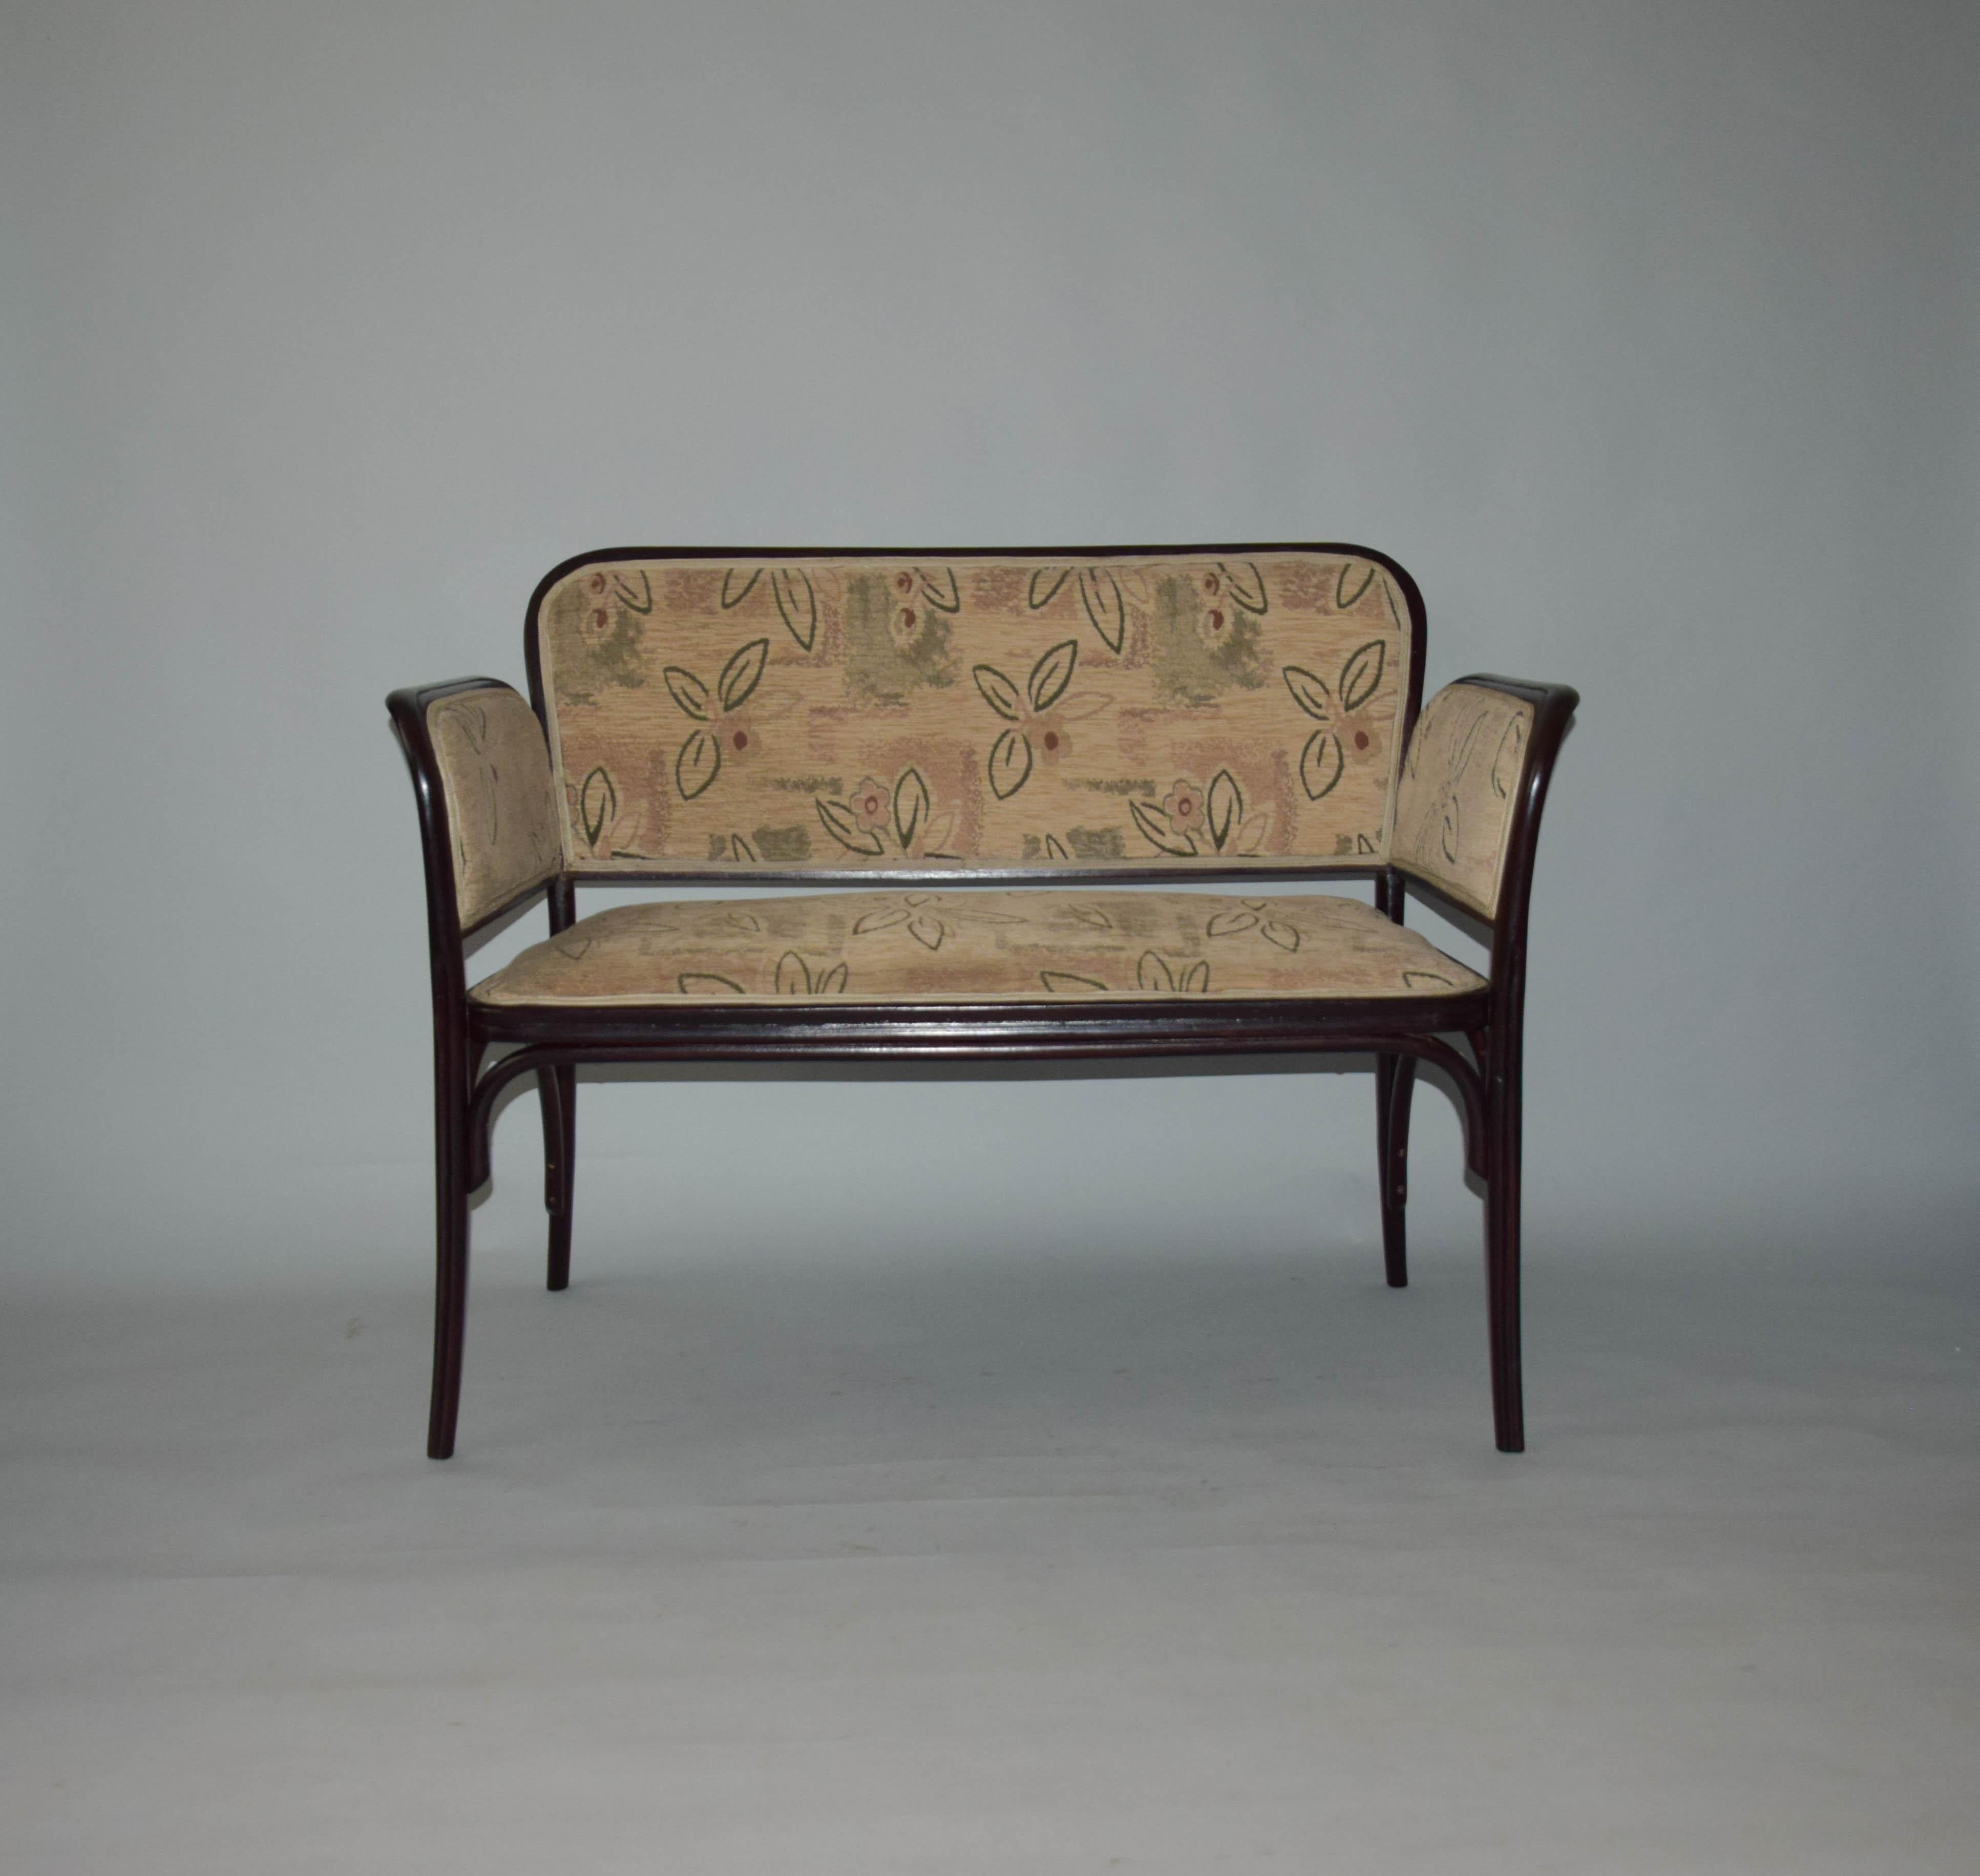 Upholstery Art Nouveau Seating Set by Otto Wagner for Thonet, 1910s For Sale